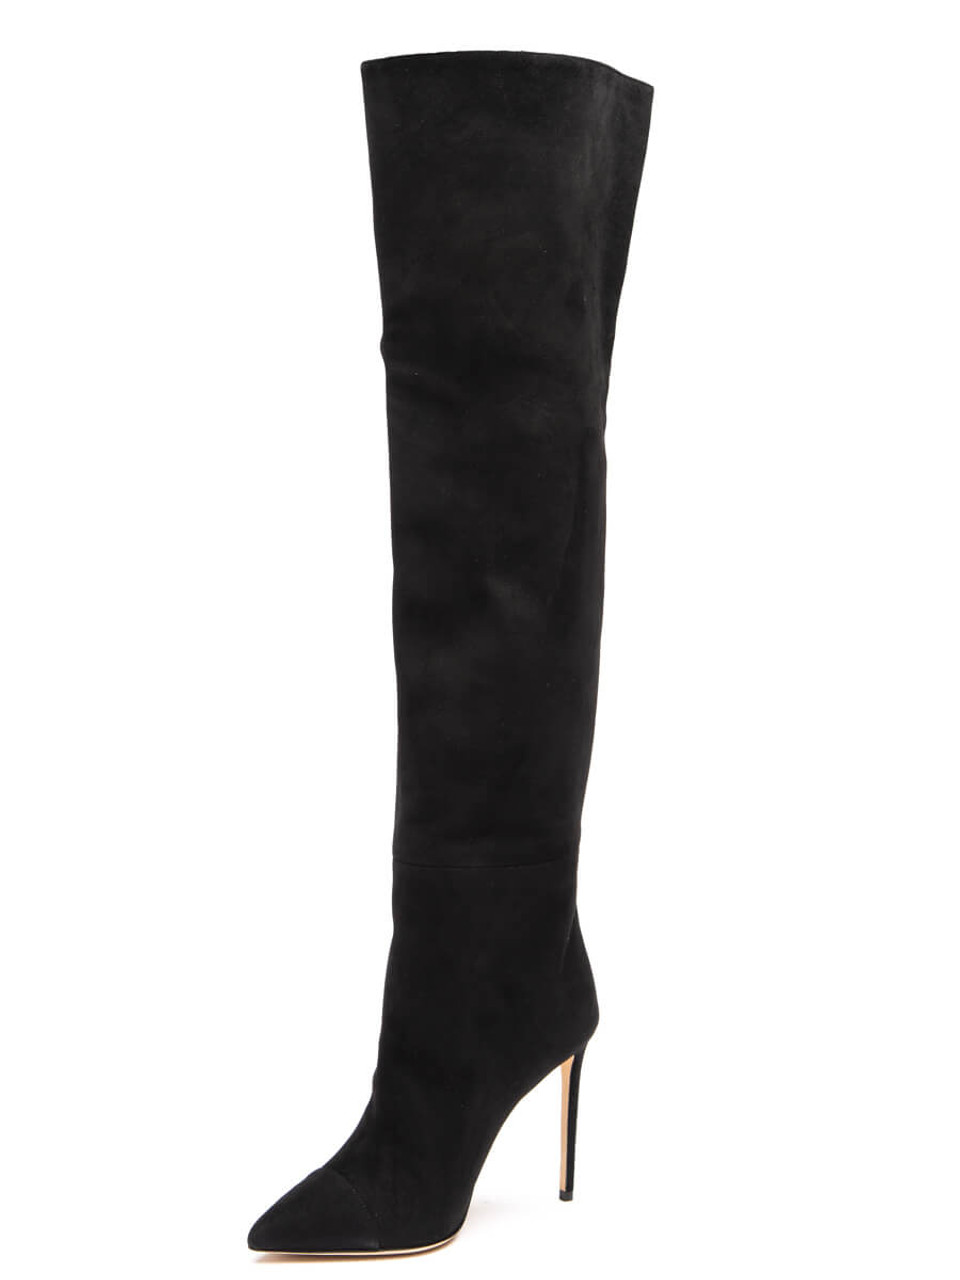 Ralph & Russo Women's Over-the-knee Boots, Size 5 UK, Black Suede